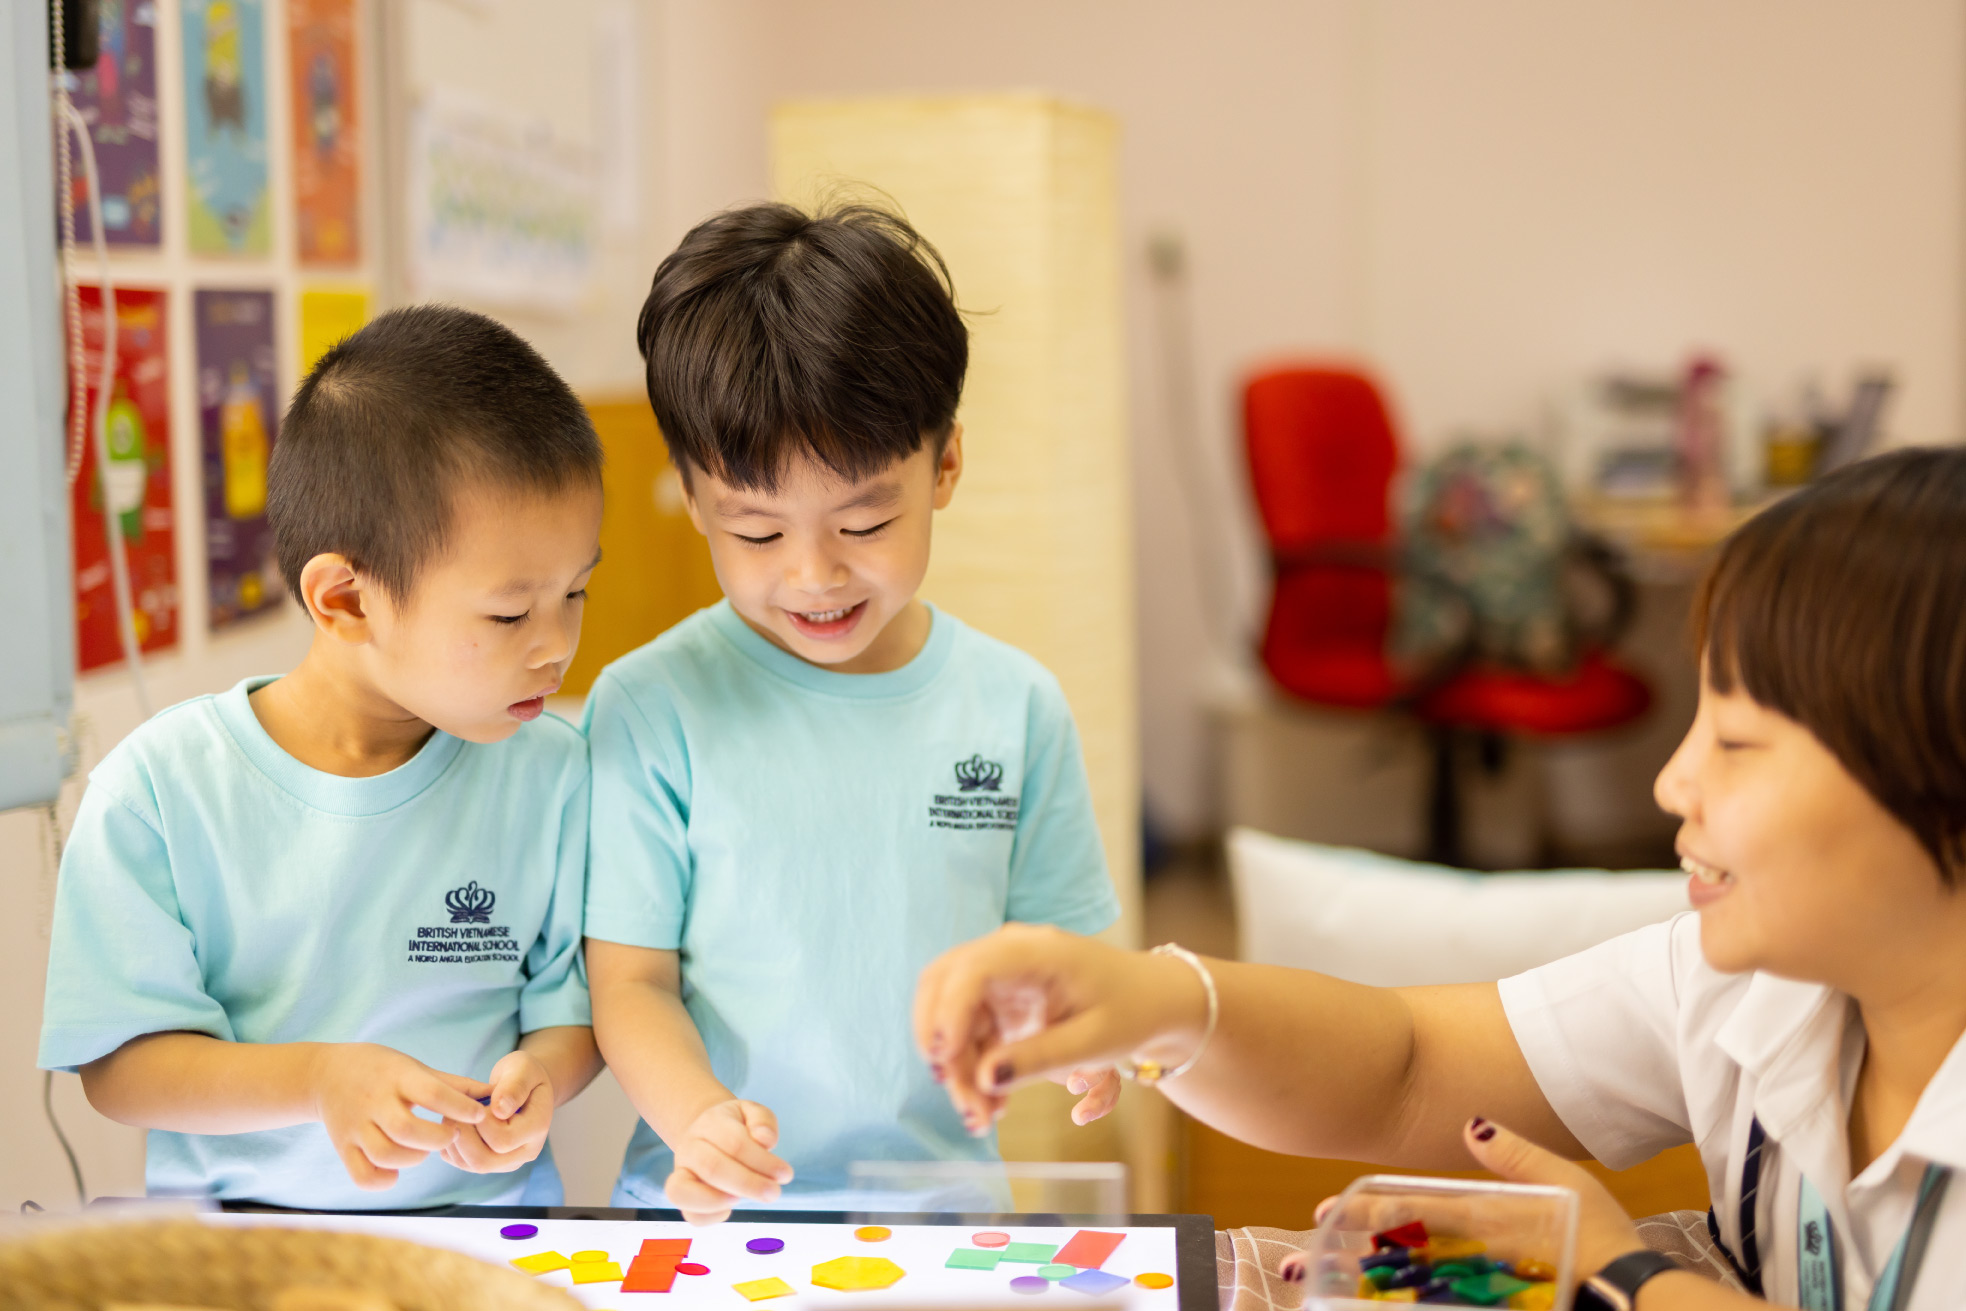 International expert: play-based learning is the future of early years education in Vietnam - Play-based learning is the future of early years education in Vietnam